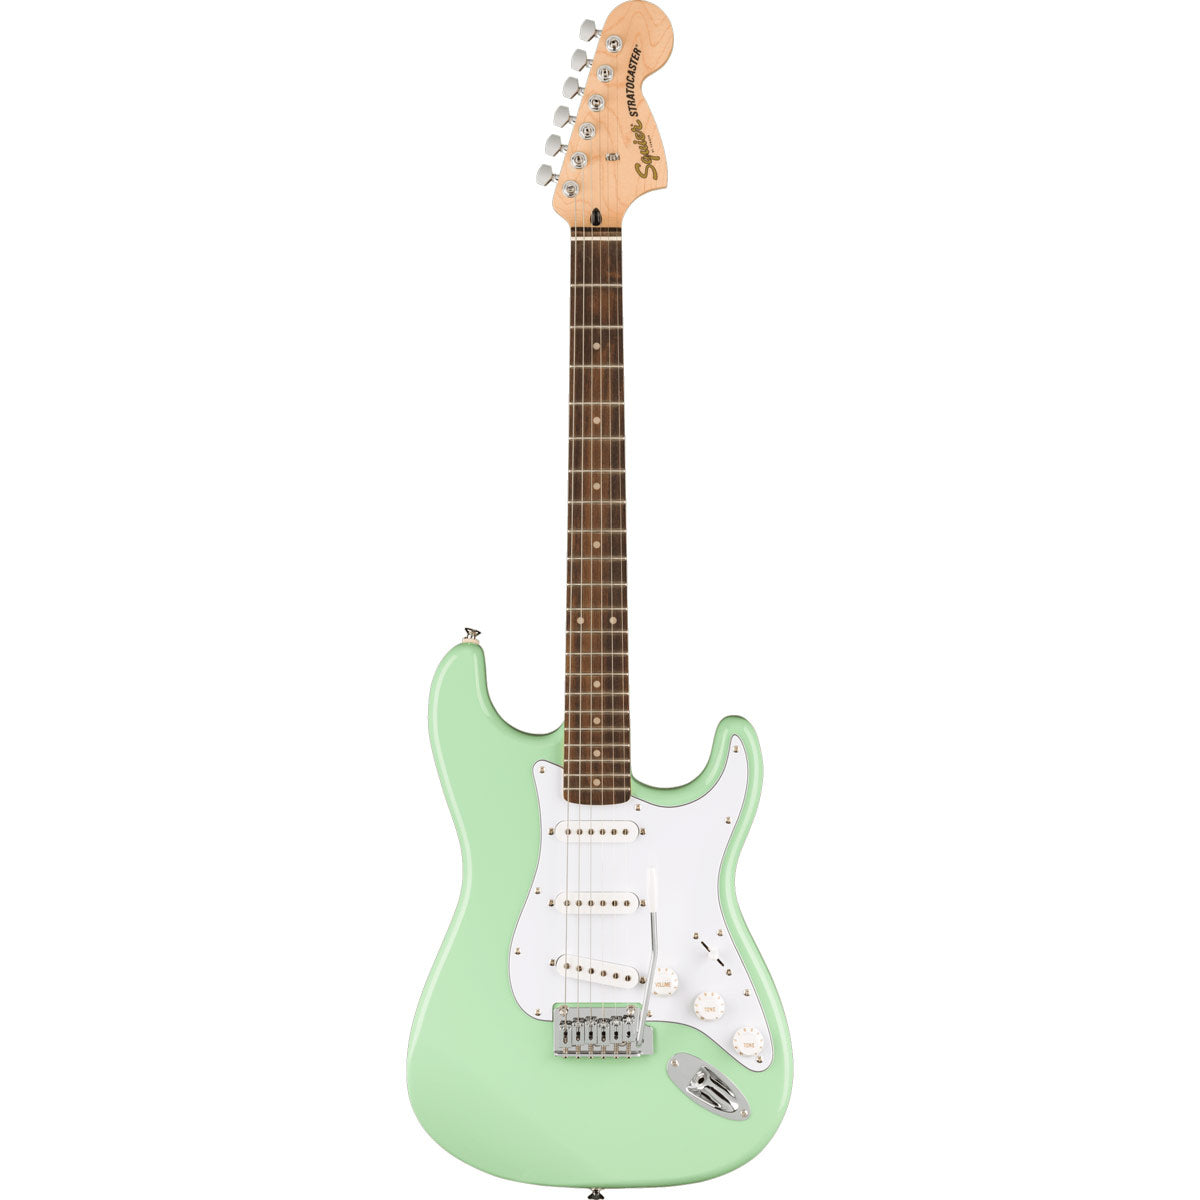 Squier Affinity Stratocaster - Surf Green